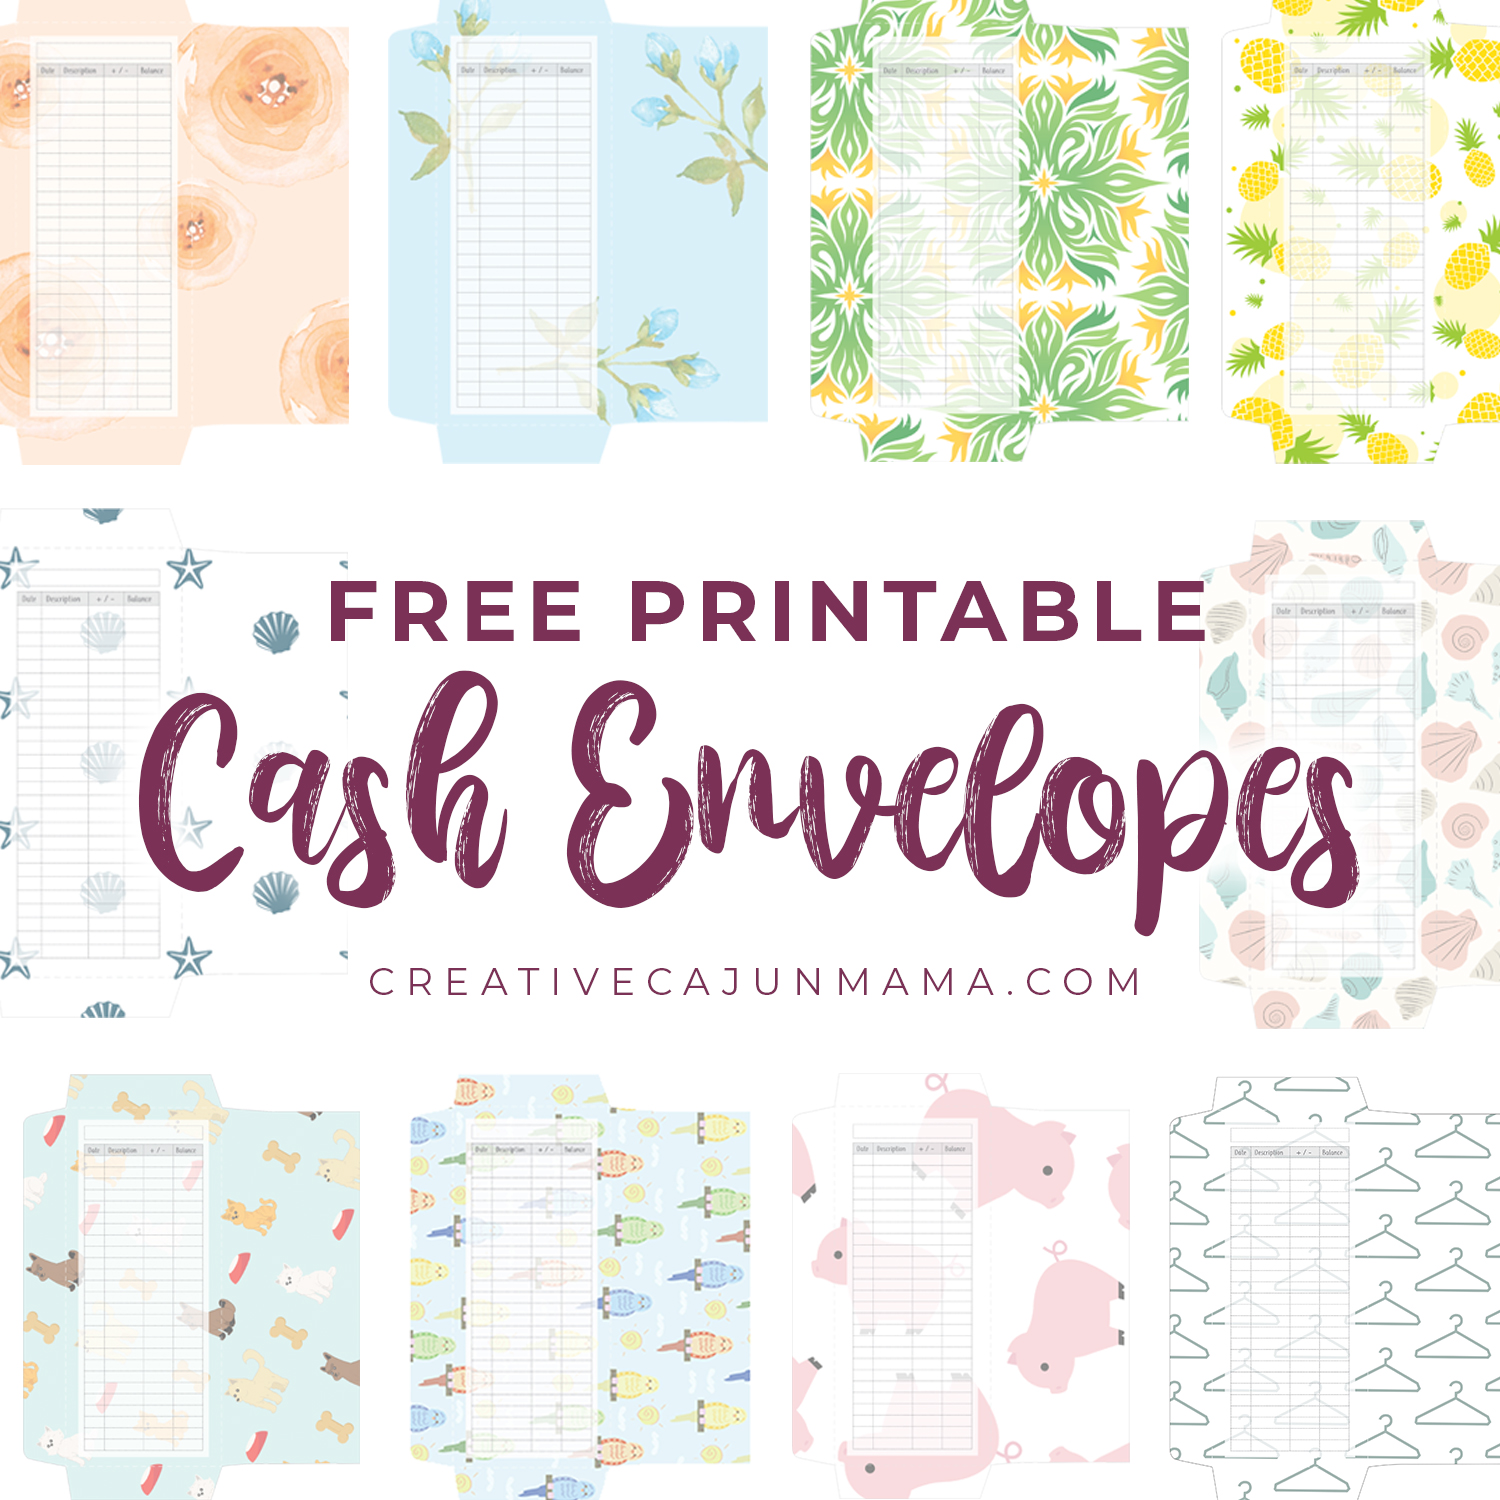 Take Control of Your Spending Using Cash Envelopes + FREE Printable